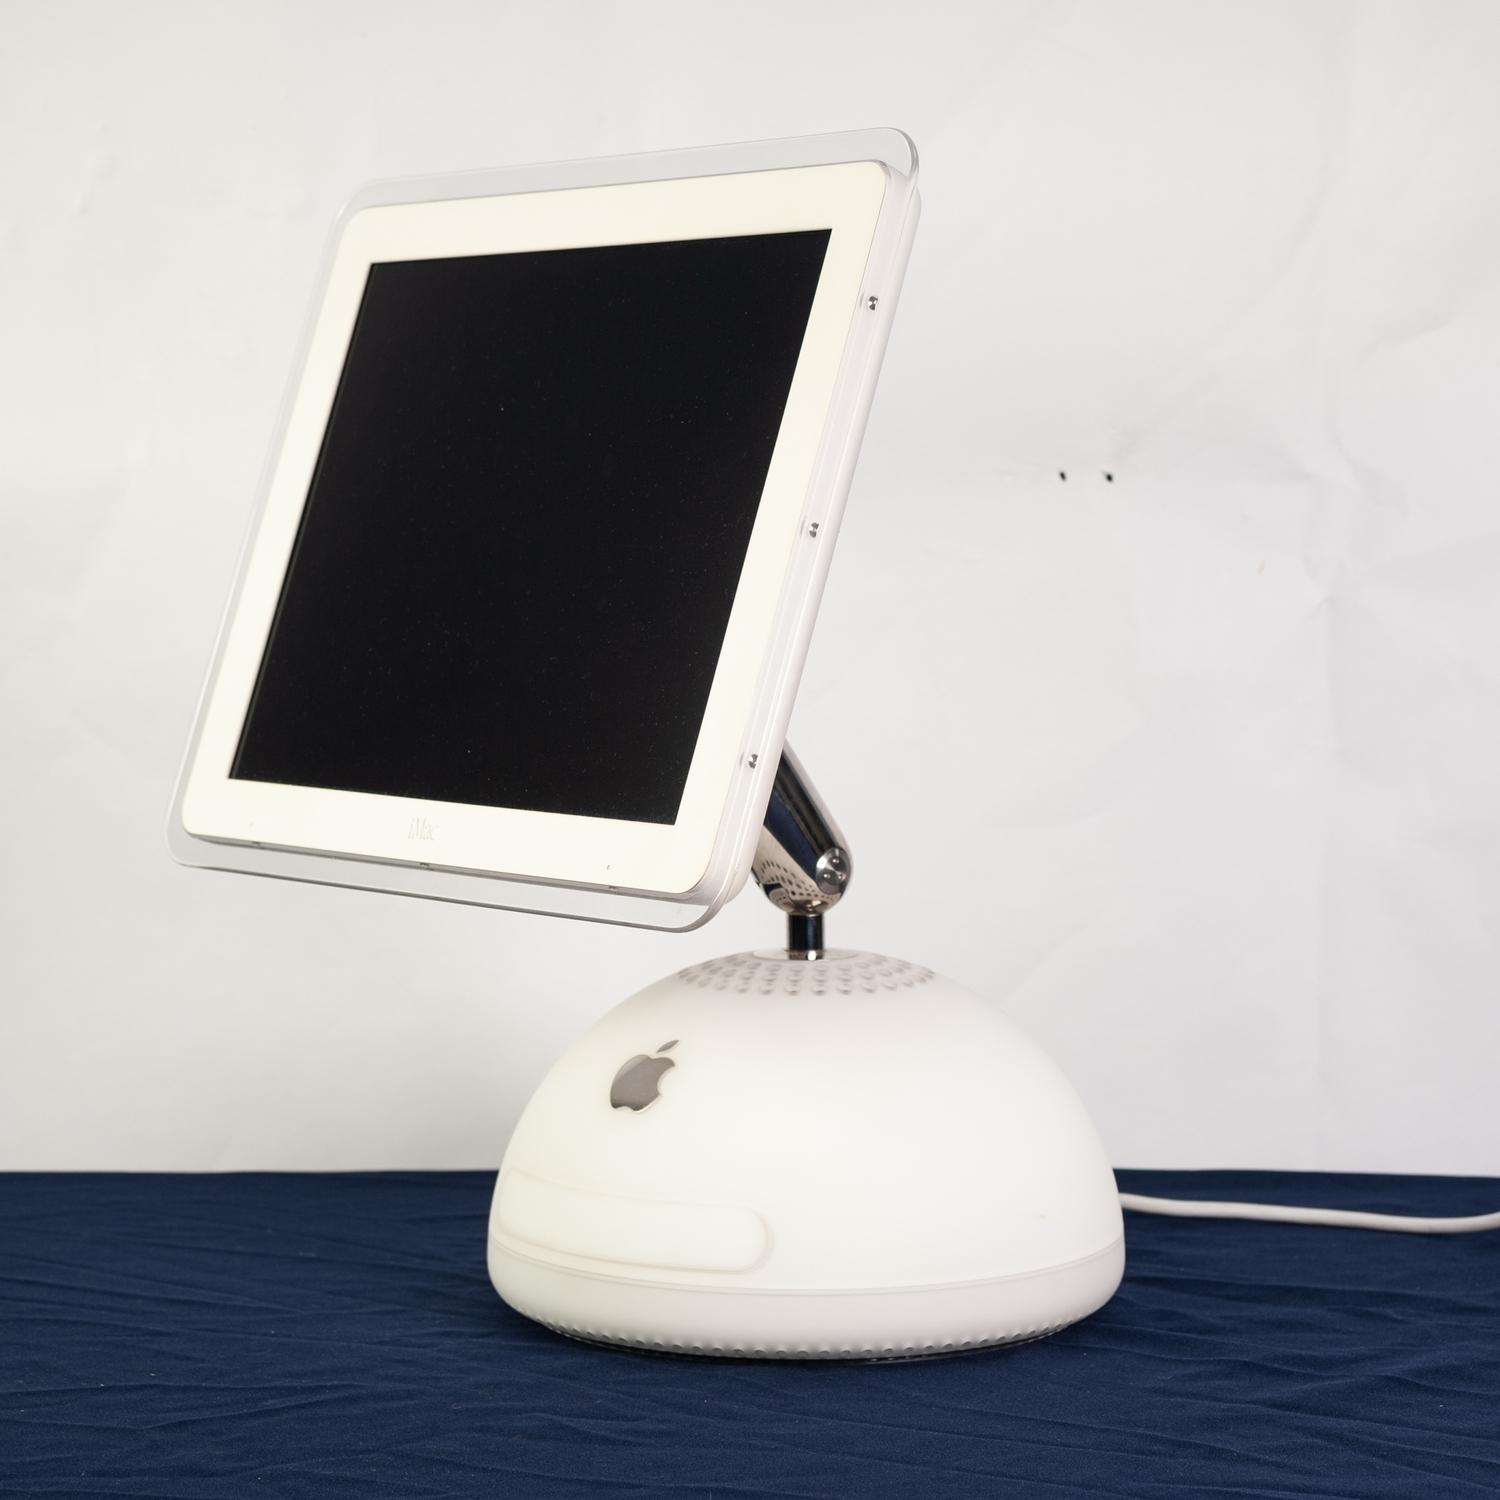 iMAC G4, VERSION 10.5.8, 15 INCH LCD DISPLAY WITH EASY HEIGHT, TILT AND SWIVEL ADJUSTMENT, APPLE - Image 3 of 9